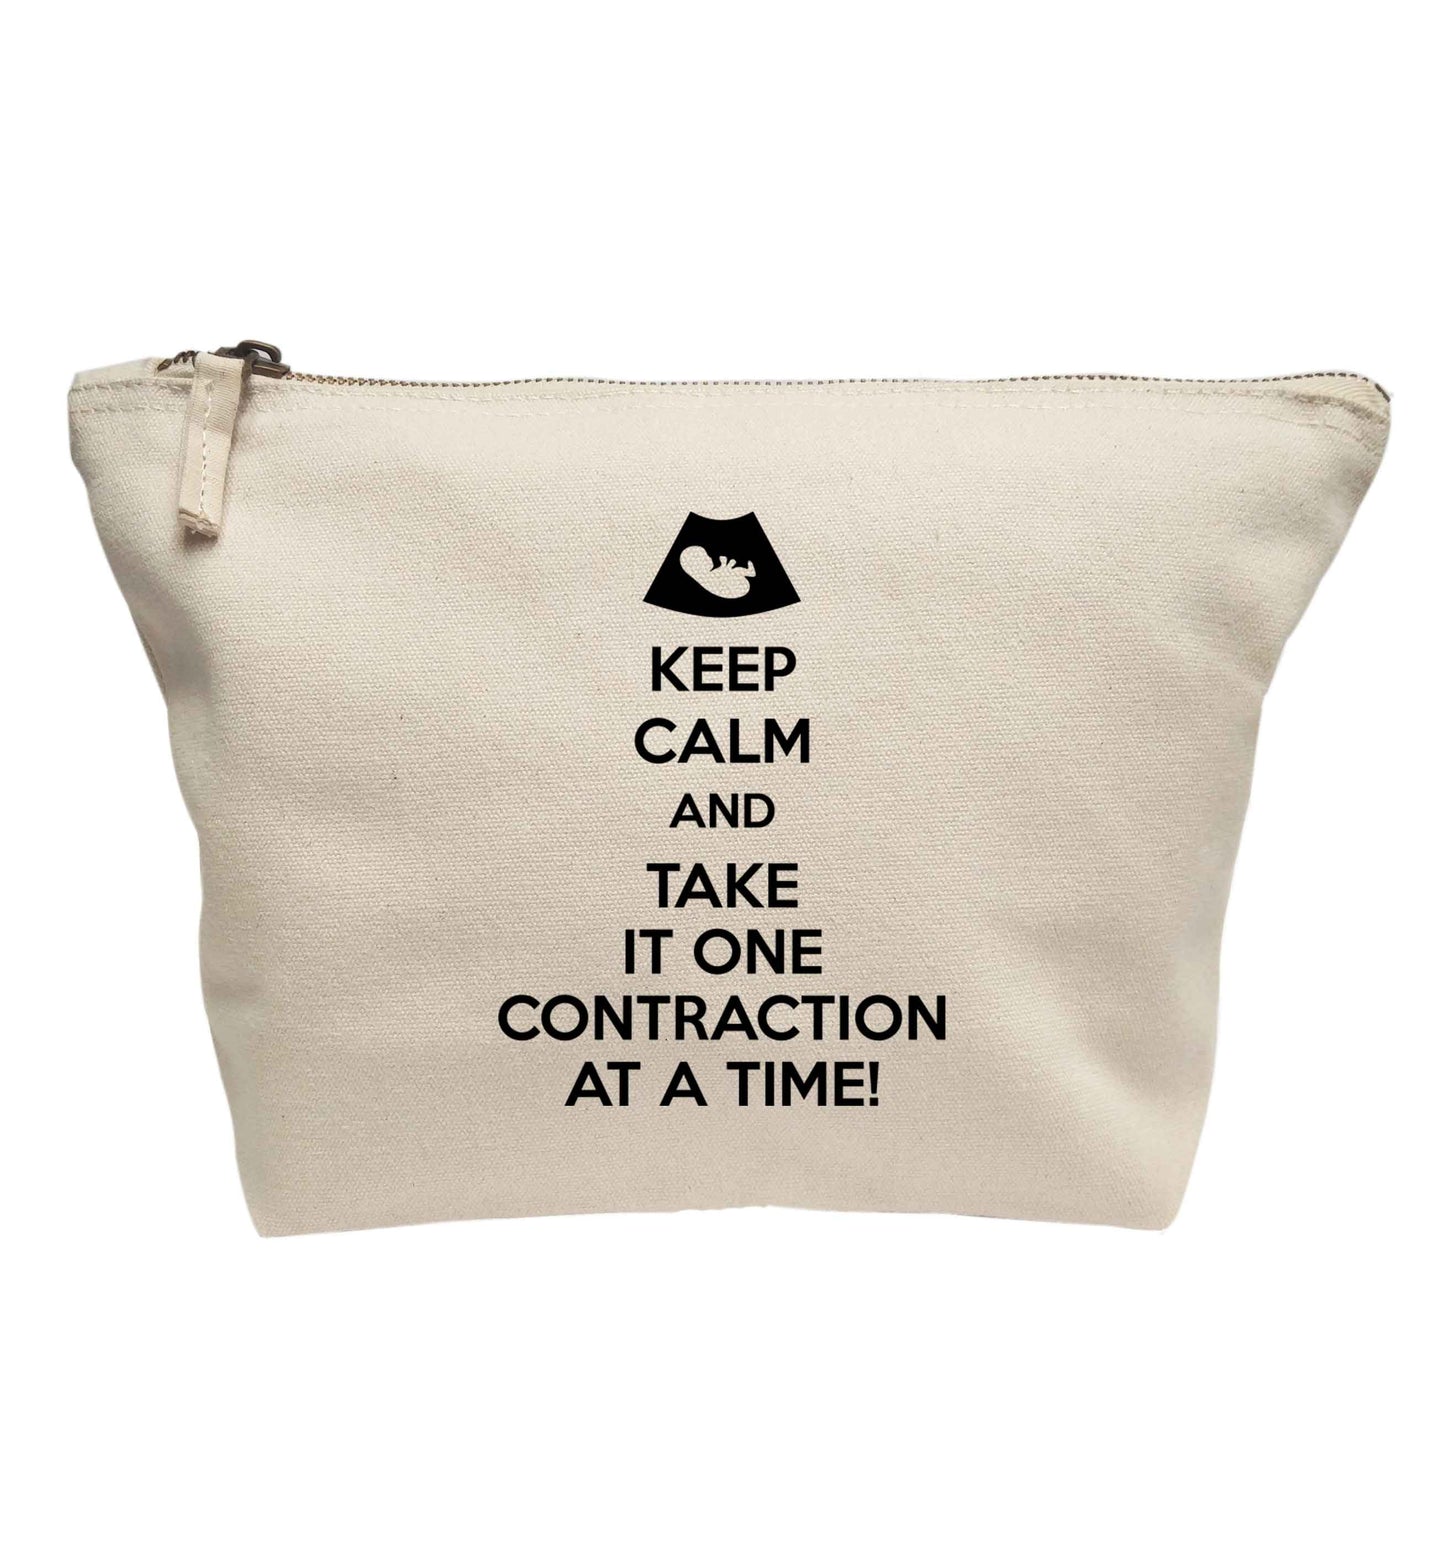 Keep calm and take it one contraction at a time | makeup / wash bag